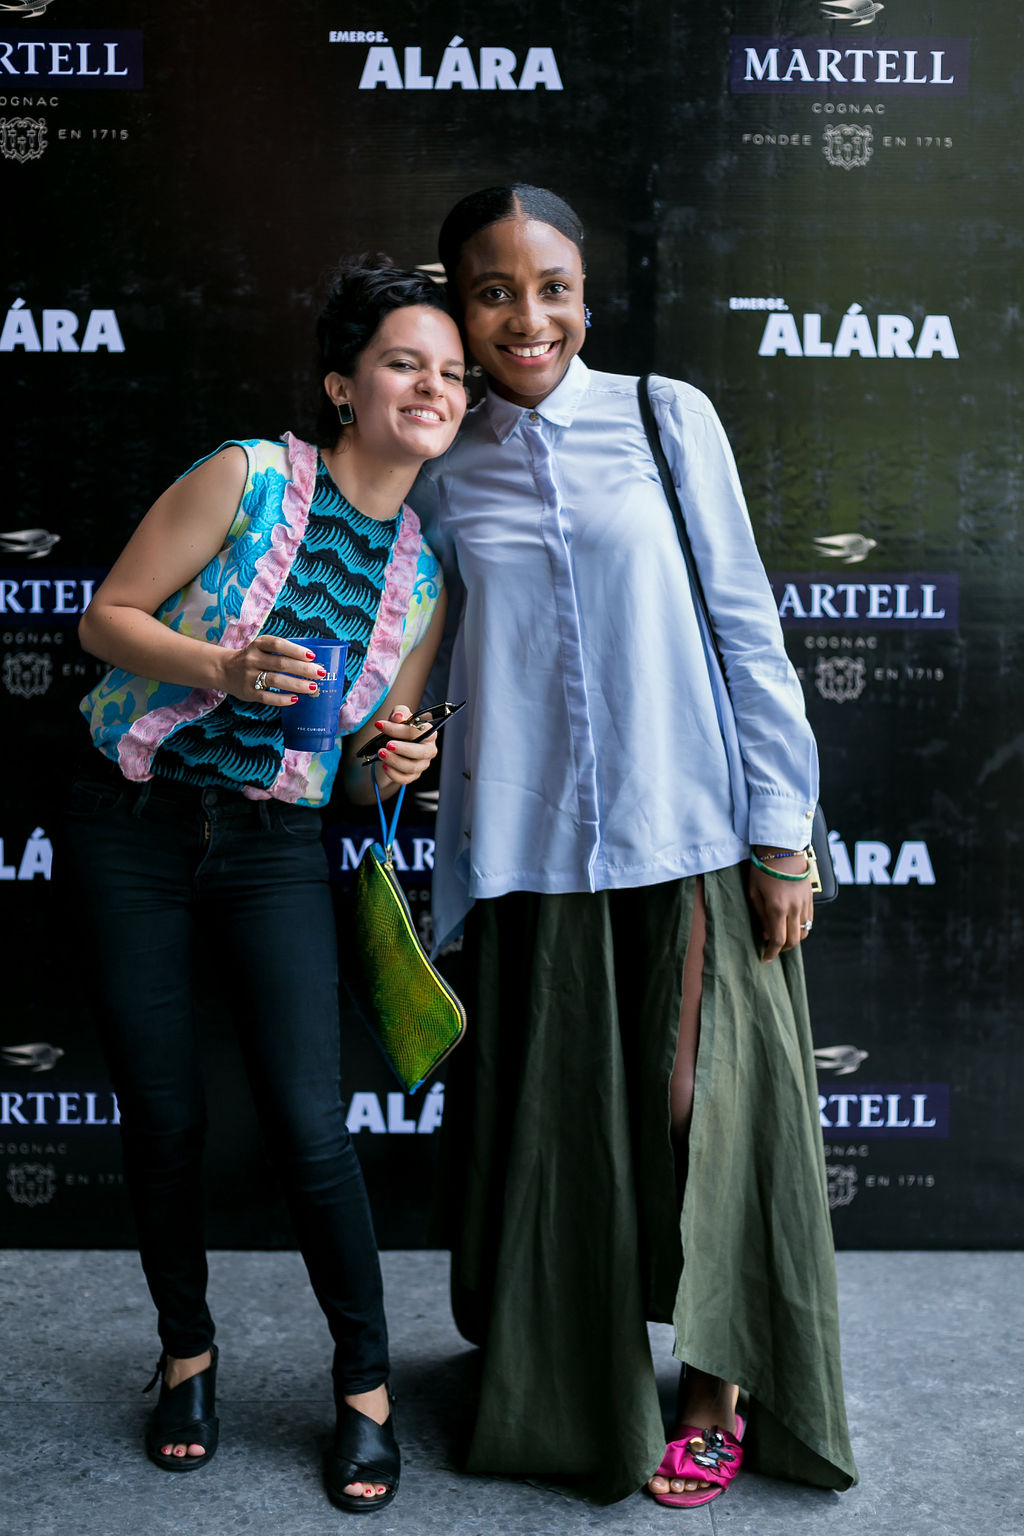 All The Fab Guests & Fun Moments At The Emerge ALÁRA Awards 2018 Finale Event